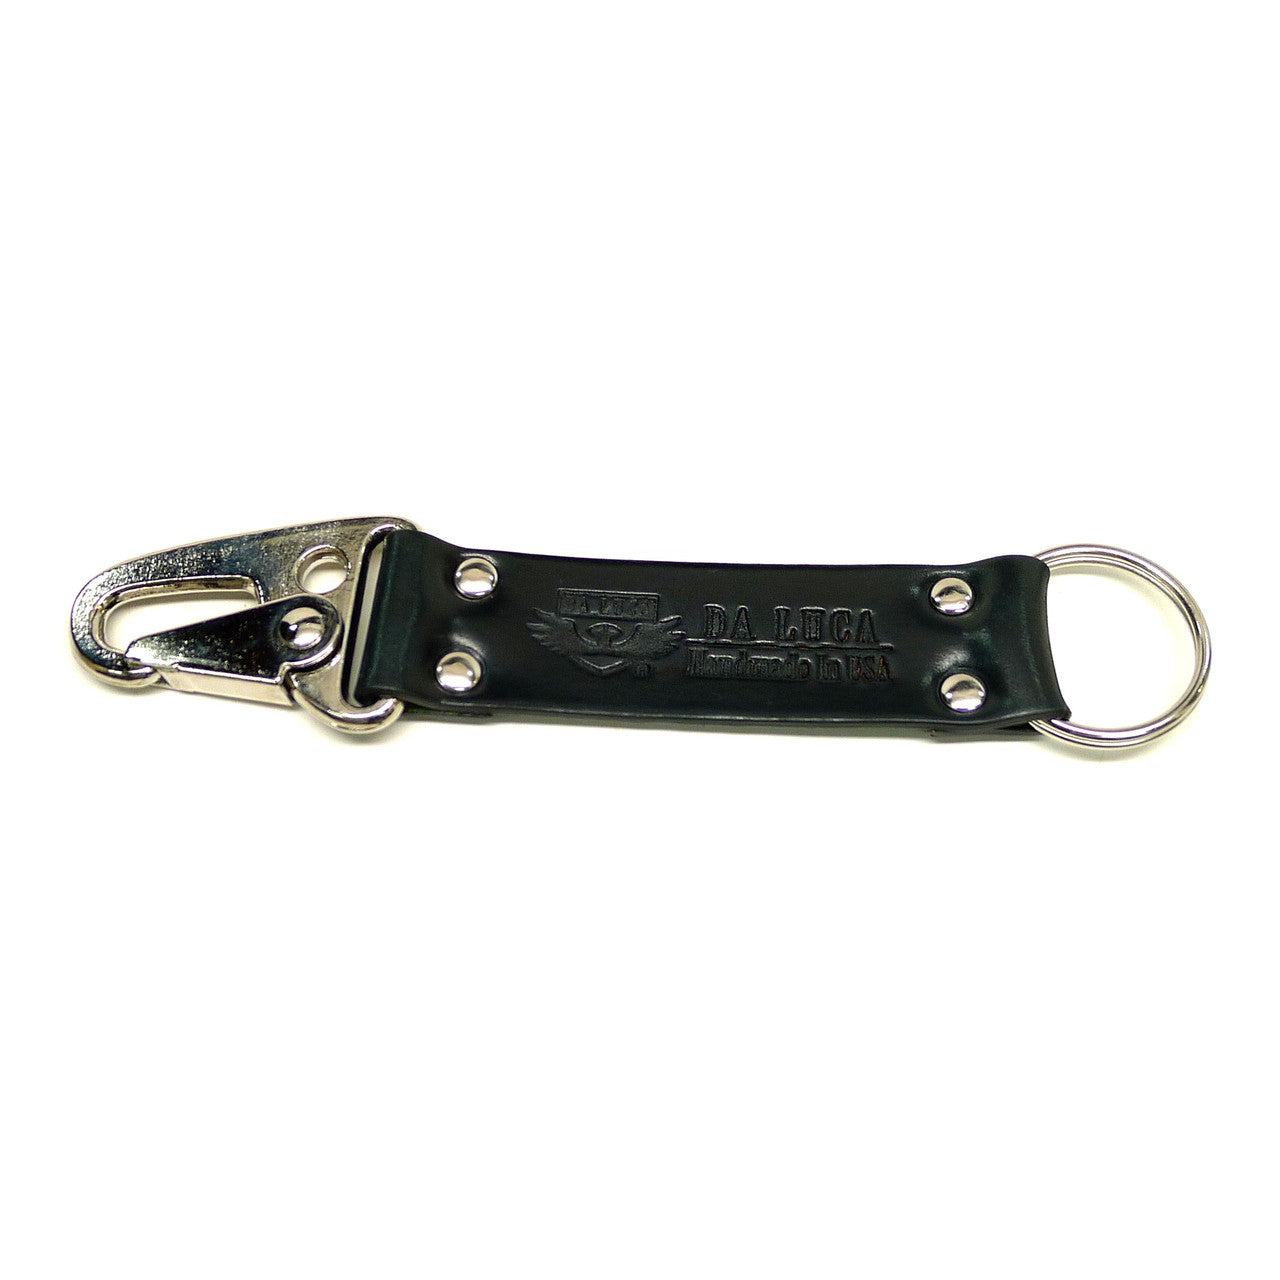 Handmade Keychain Made From Genuine Horween Black Shell Cordovan Leather and Polished Hardware by DaLuca Straps.